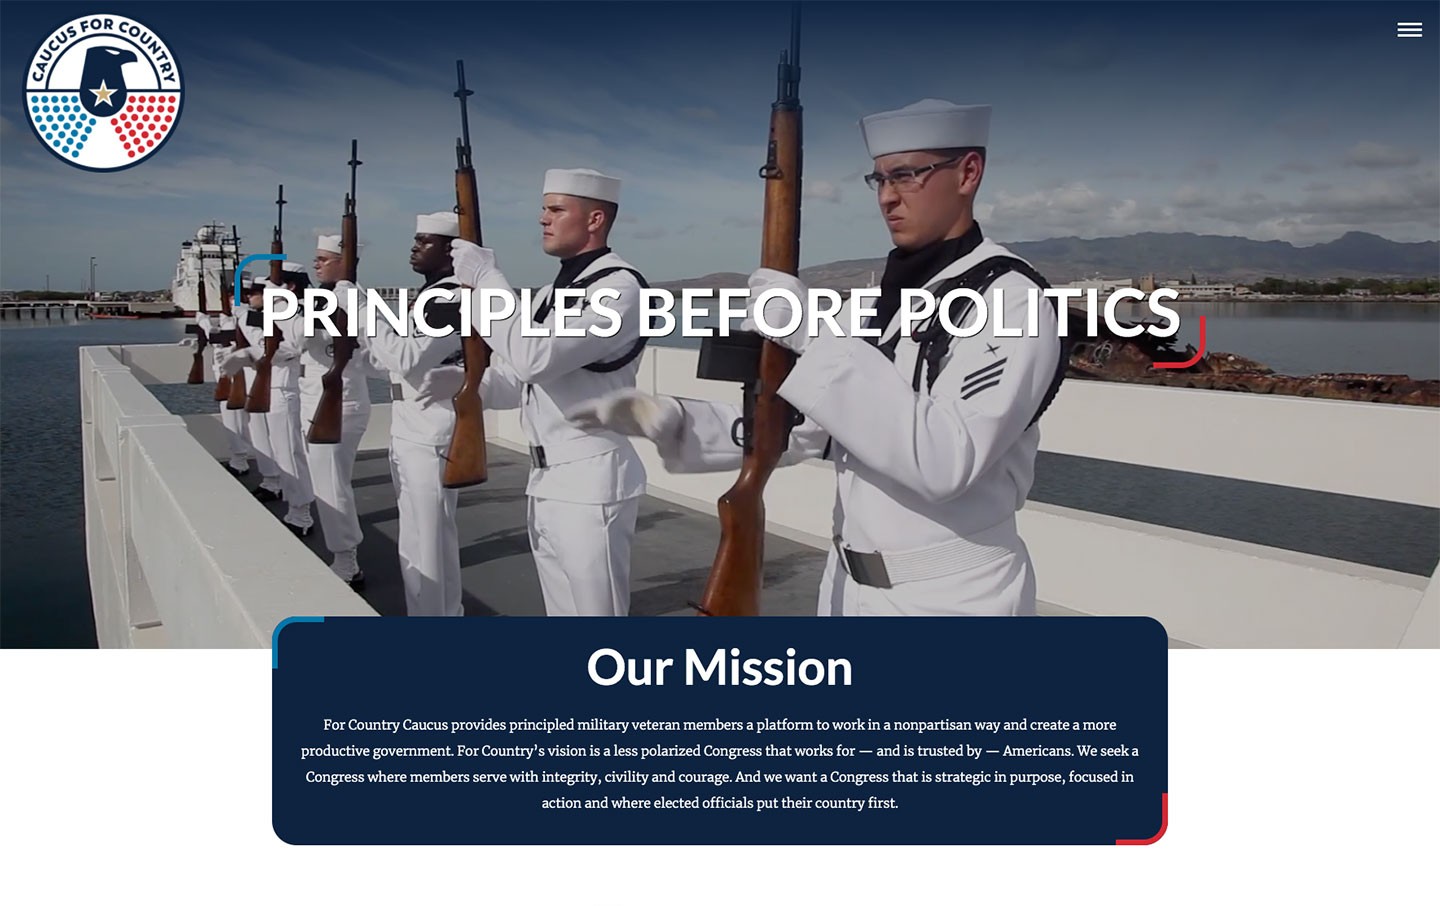 For Country Caucus top of the page. A background video of stock footage of servicemen with the text 'Principles Before Politics' and 'Our Mission' shown.